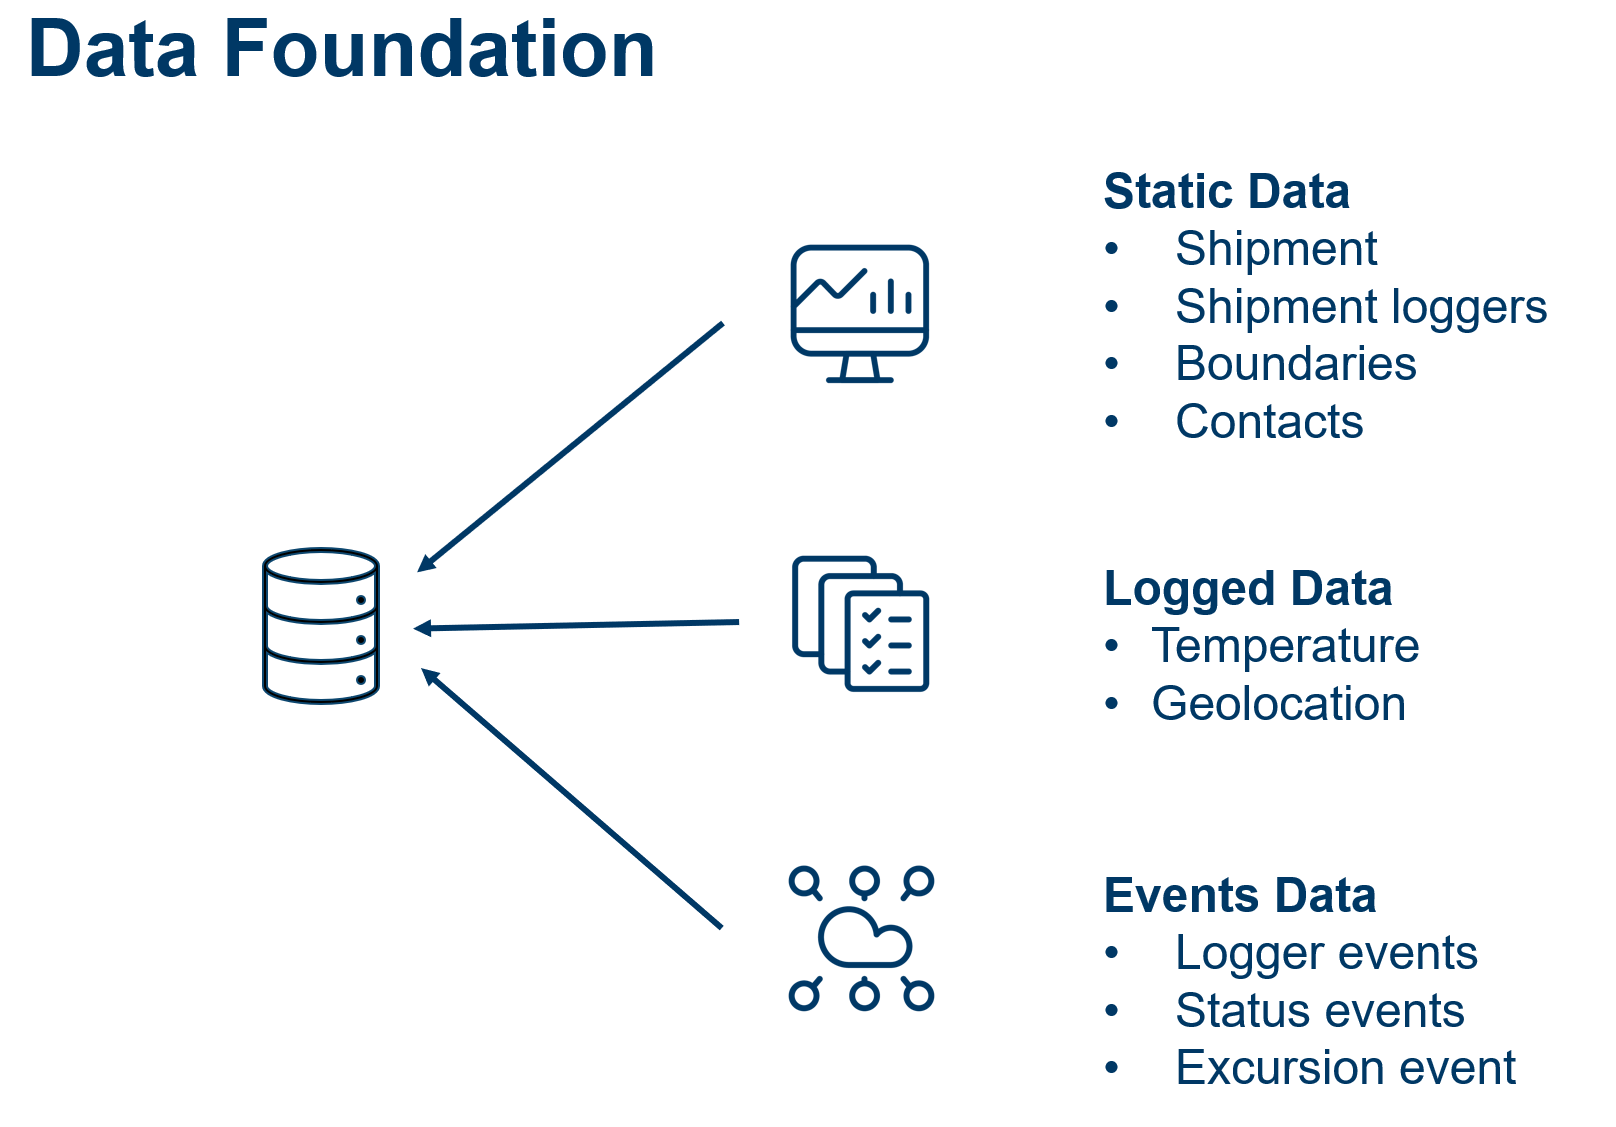 Data foundation overview